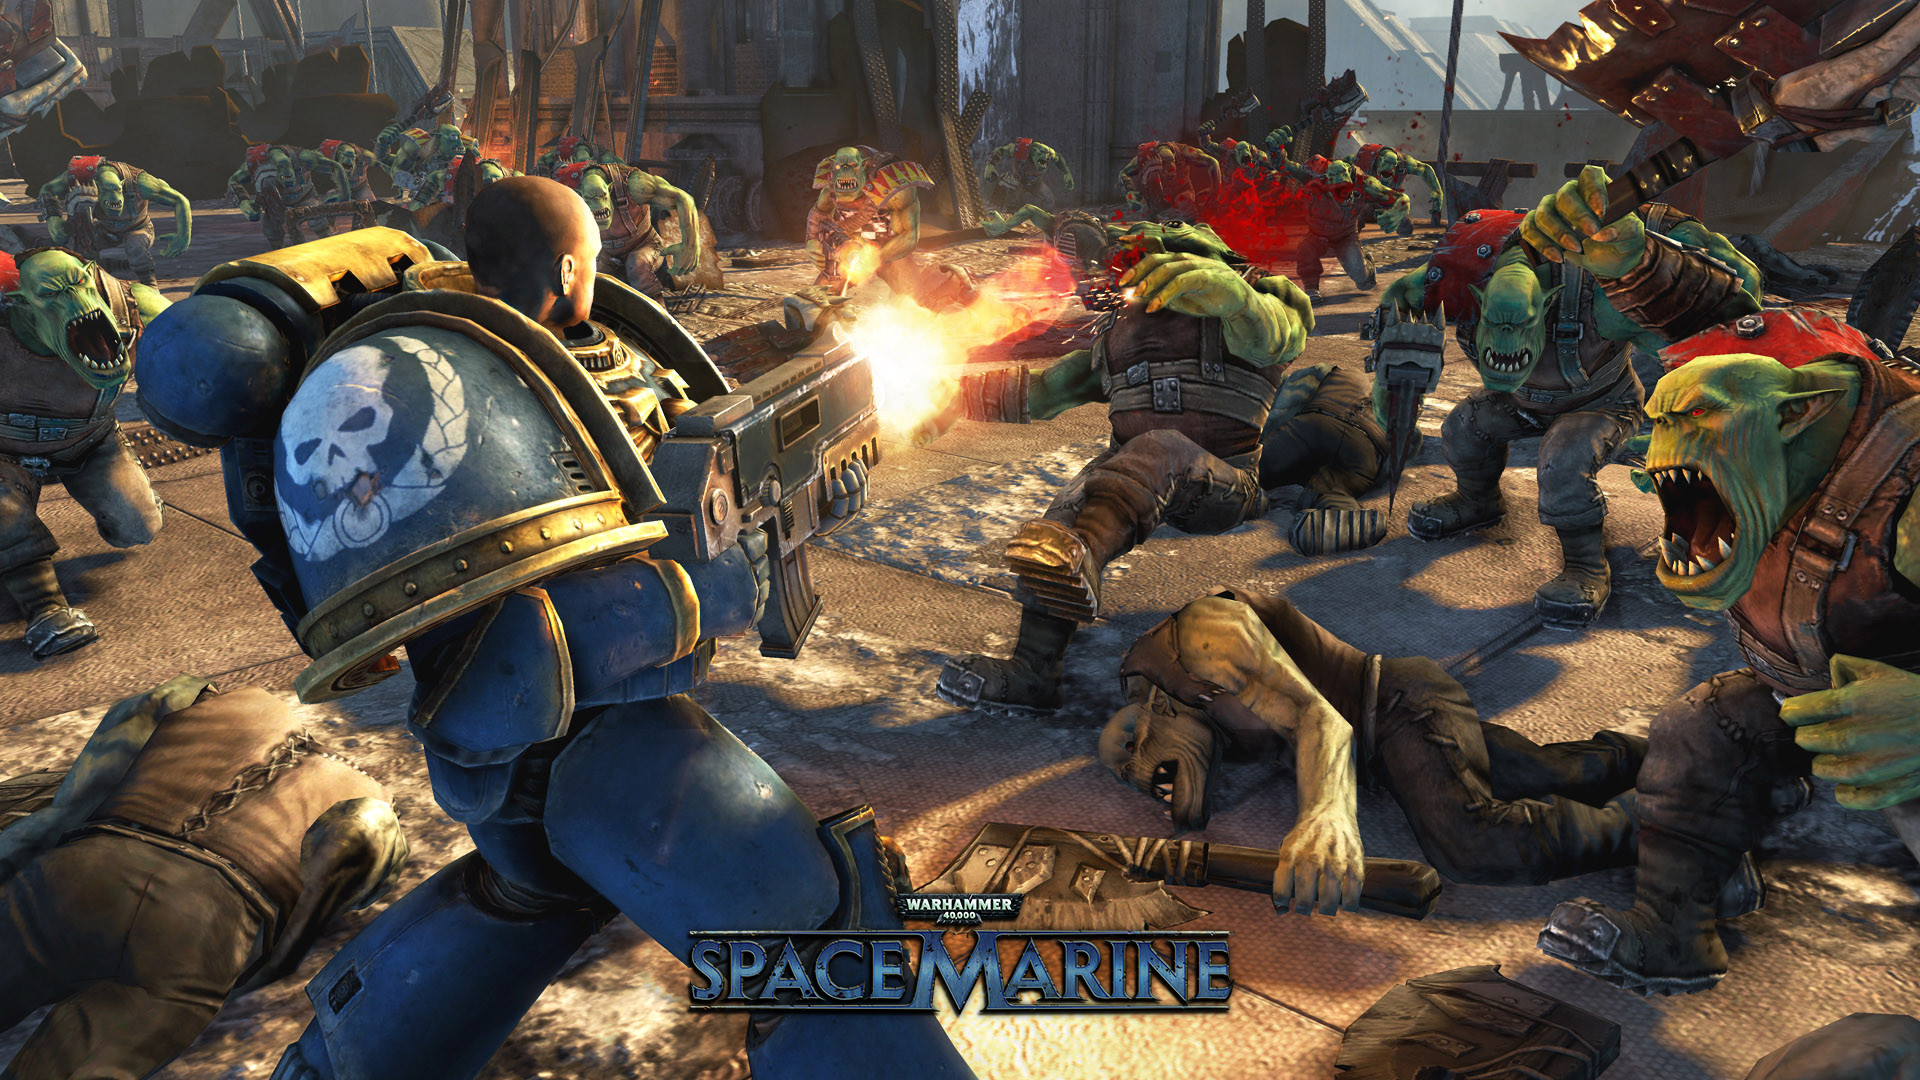 A Space Marine fires into a bunch of Orks.